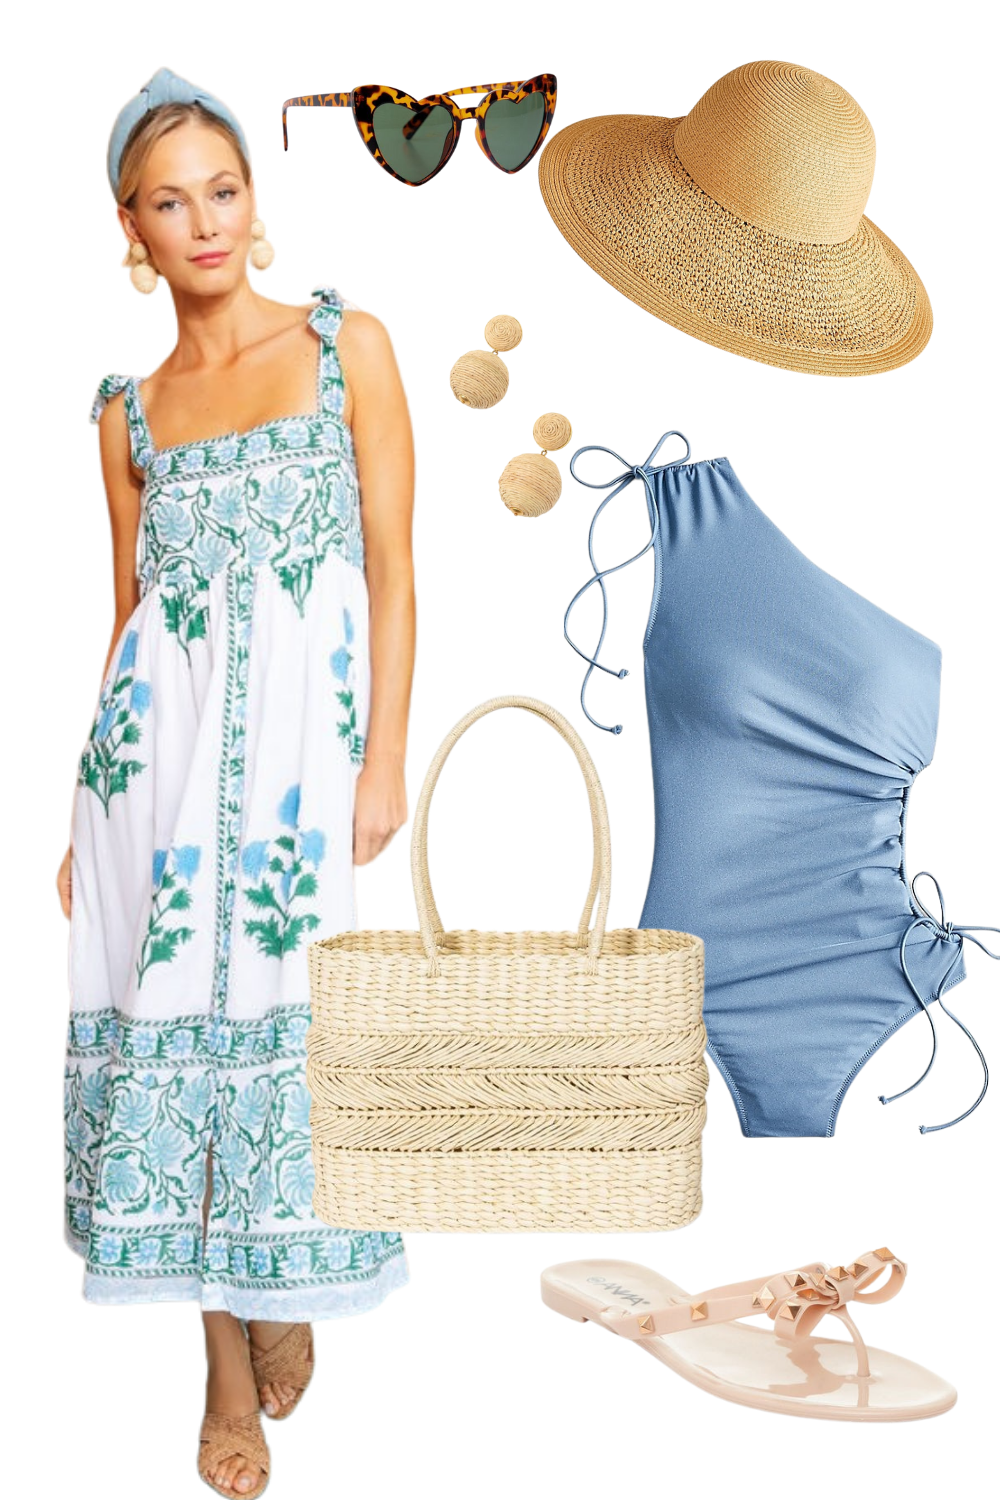 4 Vacation Outfits For The Beach And Beyond - Life on Pineapple Lane